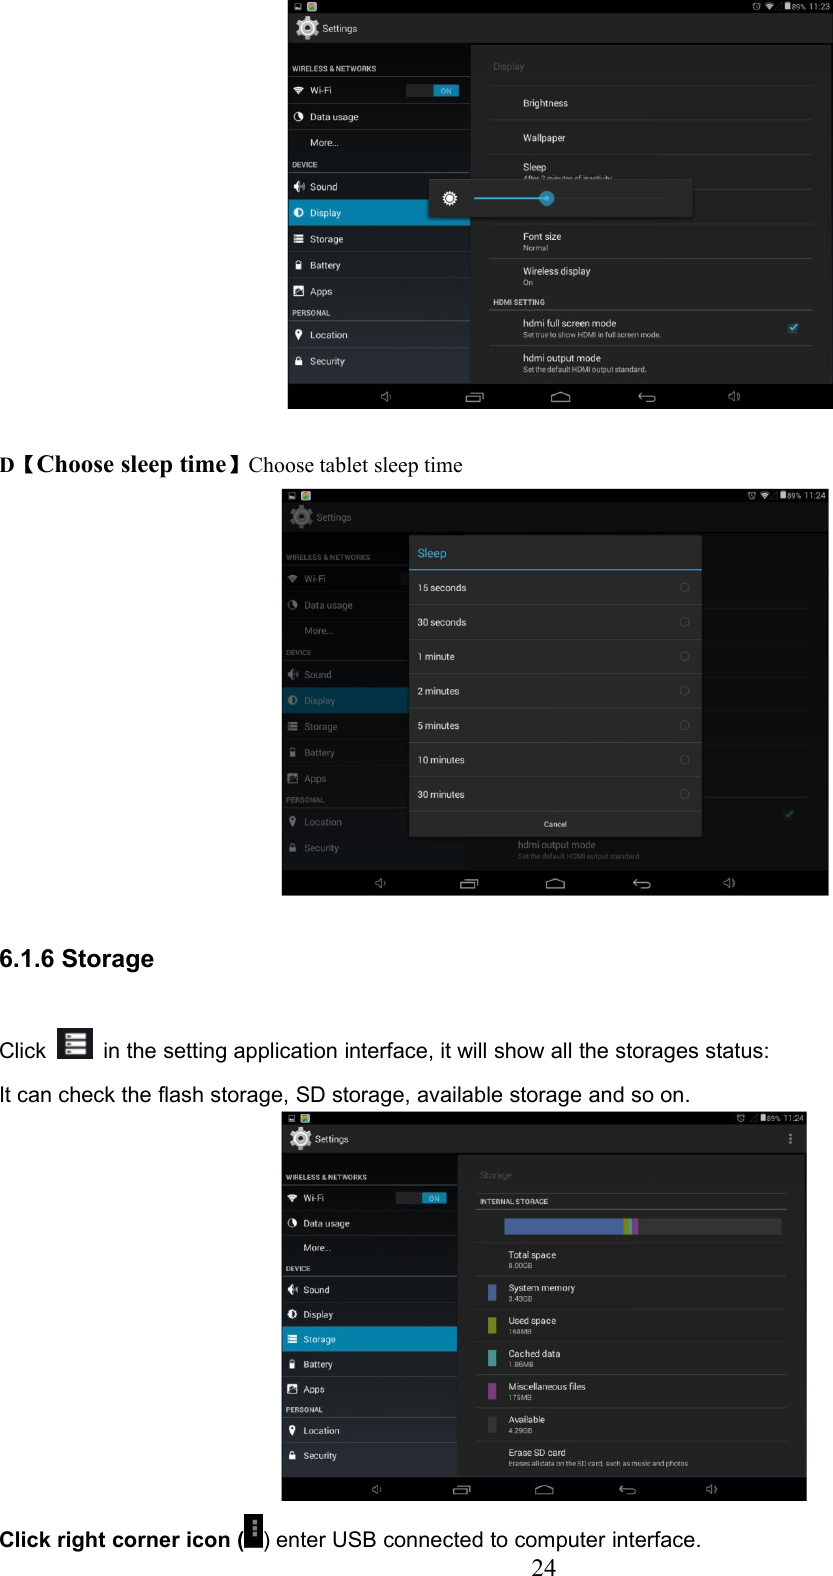 24D【Choose sleep time】Choose tablet sleep time6.1.6 StorageClick in the setting application interface, it will show all the storages status:It can check the flash storage, SD storage, available storage and so on.Click right corner icon ( ) enter USB connected to computer interface.